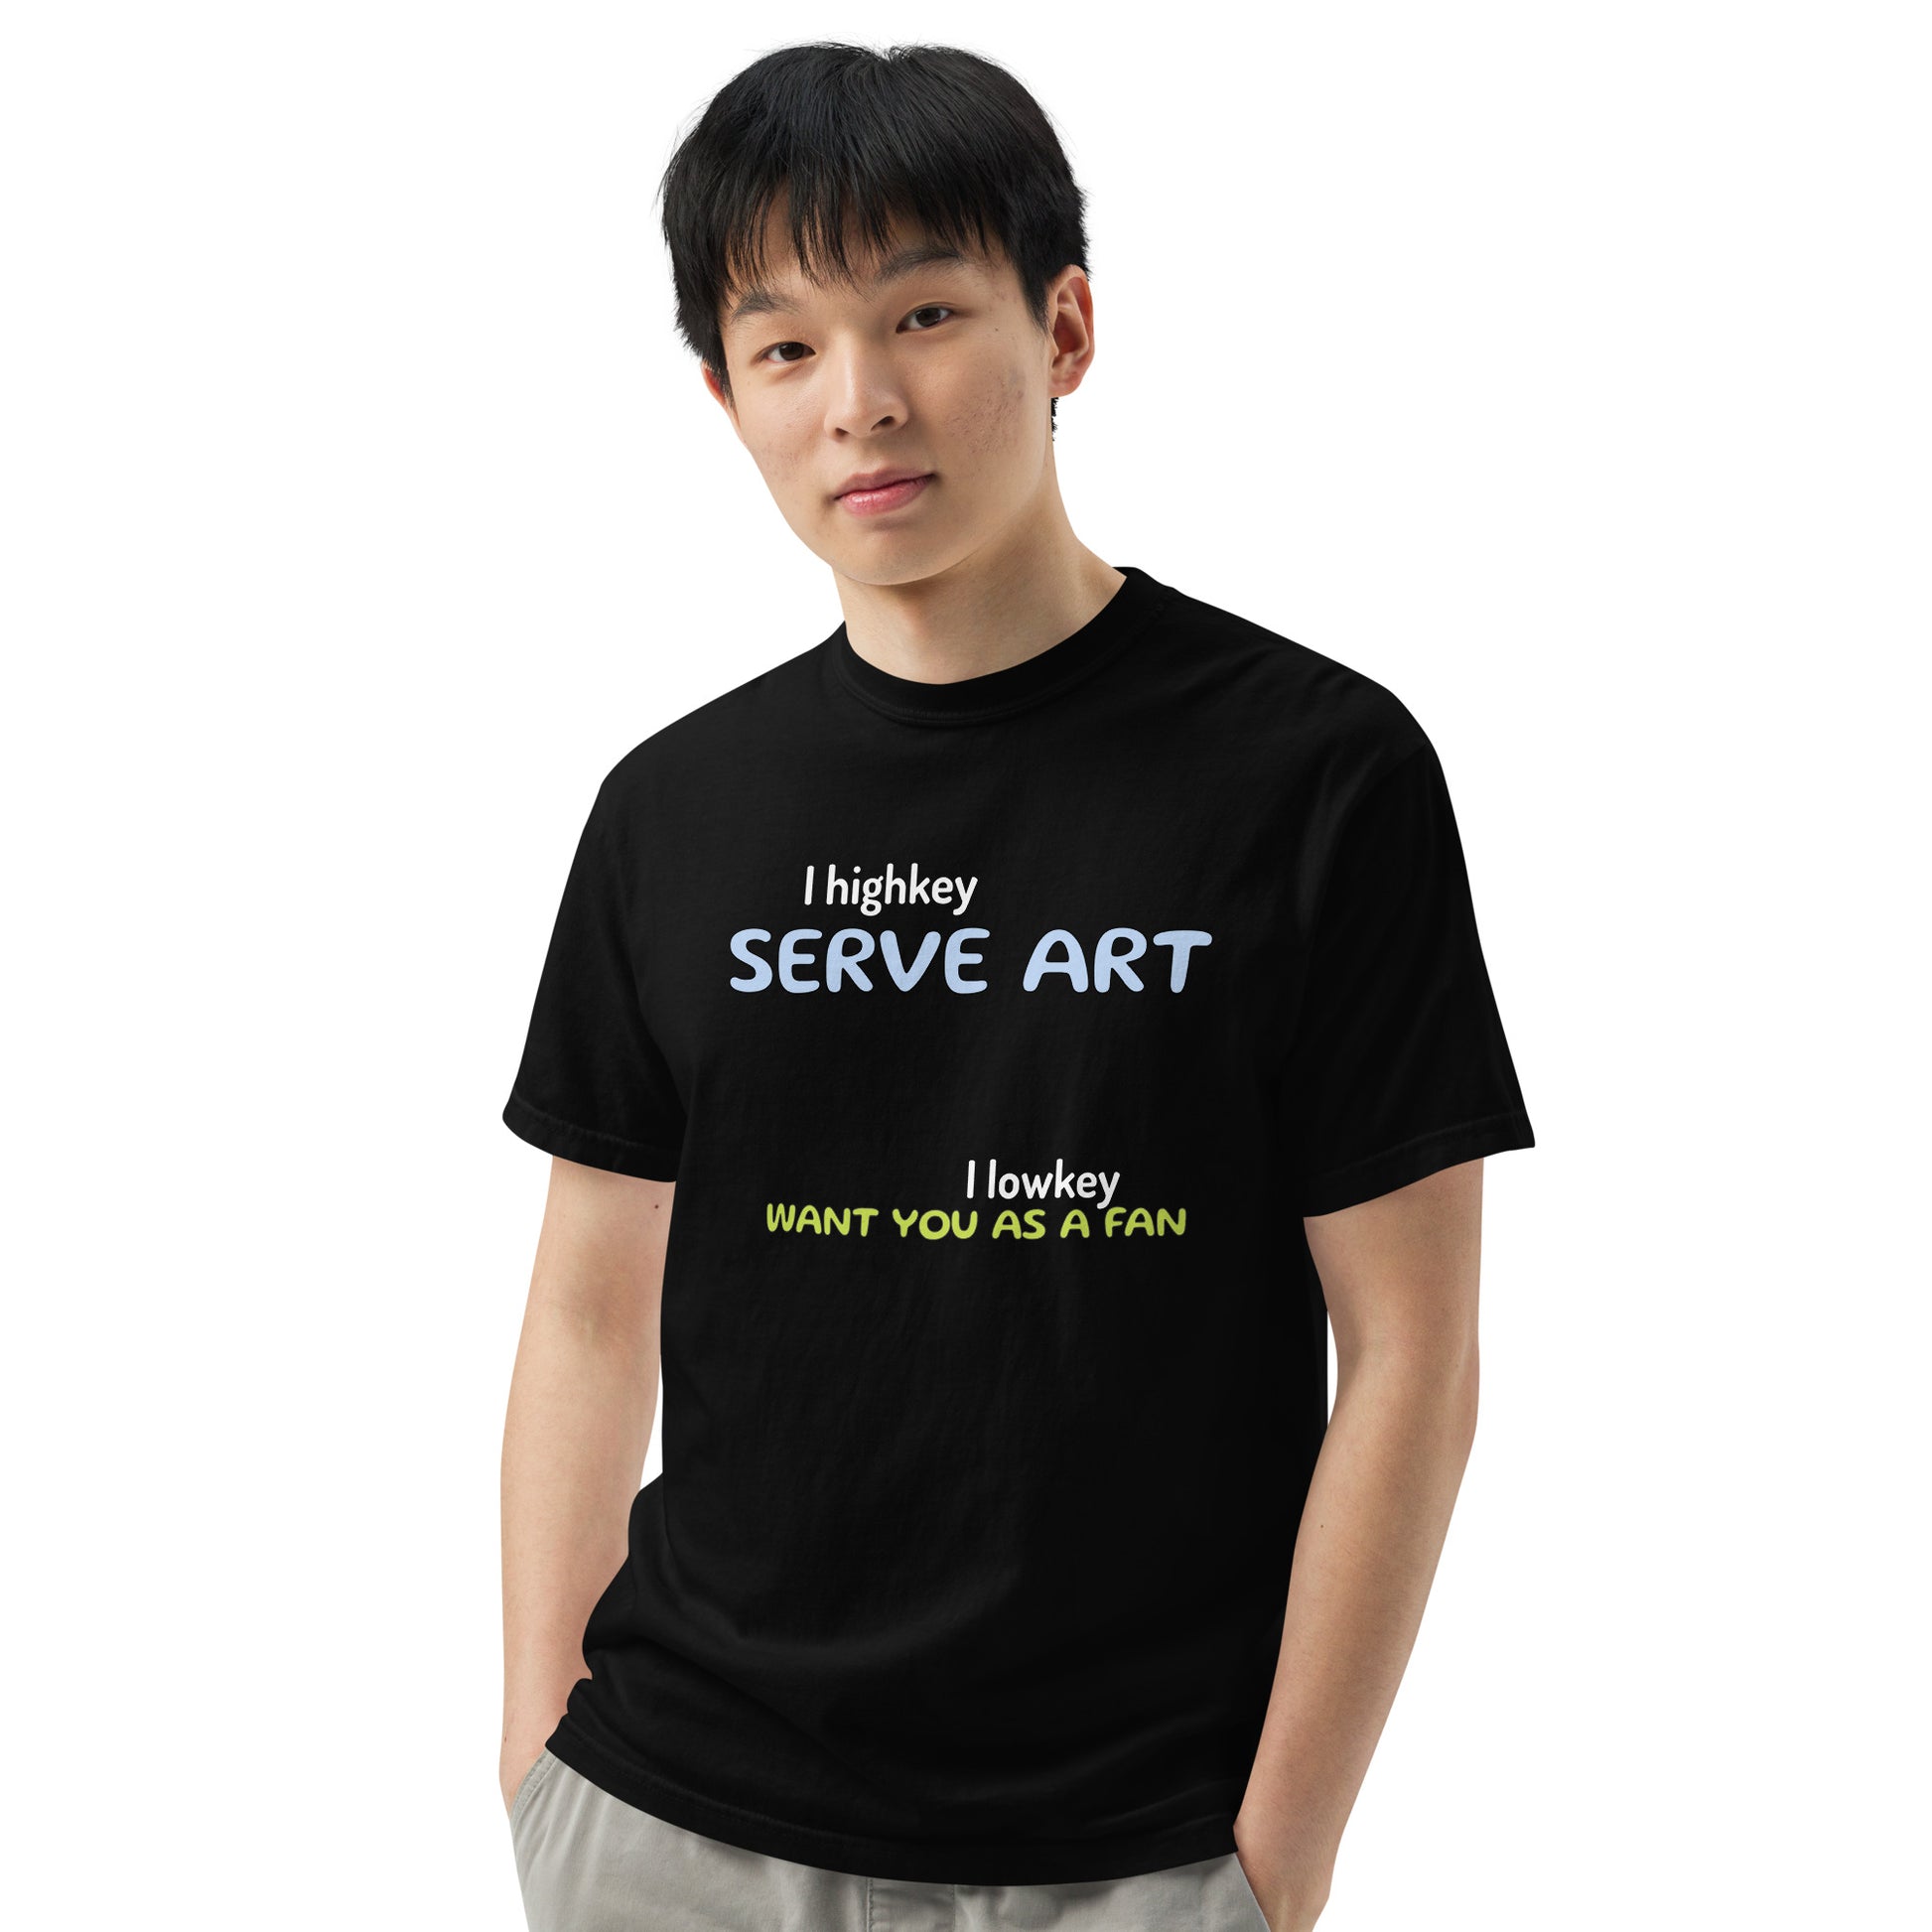 Discover the "I Serve Art" Tee from the Let 'Em Know Collection. Bold, clever texts that speak volumes and turn chance meetings into your next biggest fans. Let 'em know who you are, and watch your squad grow!